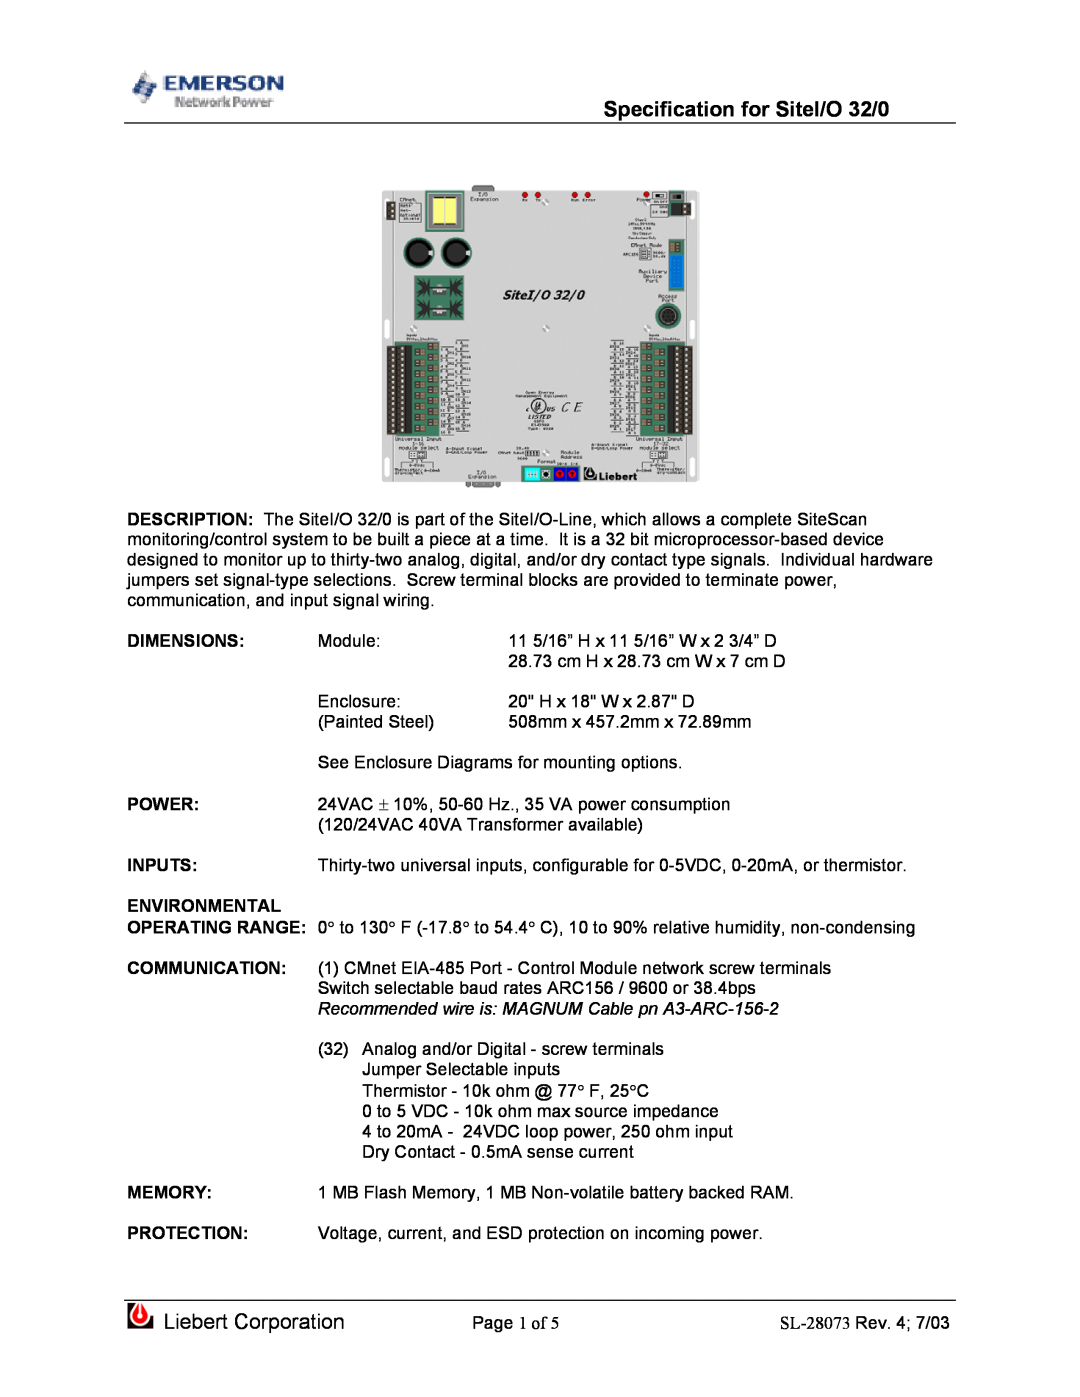 Emerson dimensions Specification for SiteI/O 32/0, Liebert Corporation 